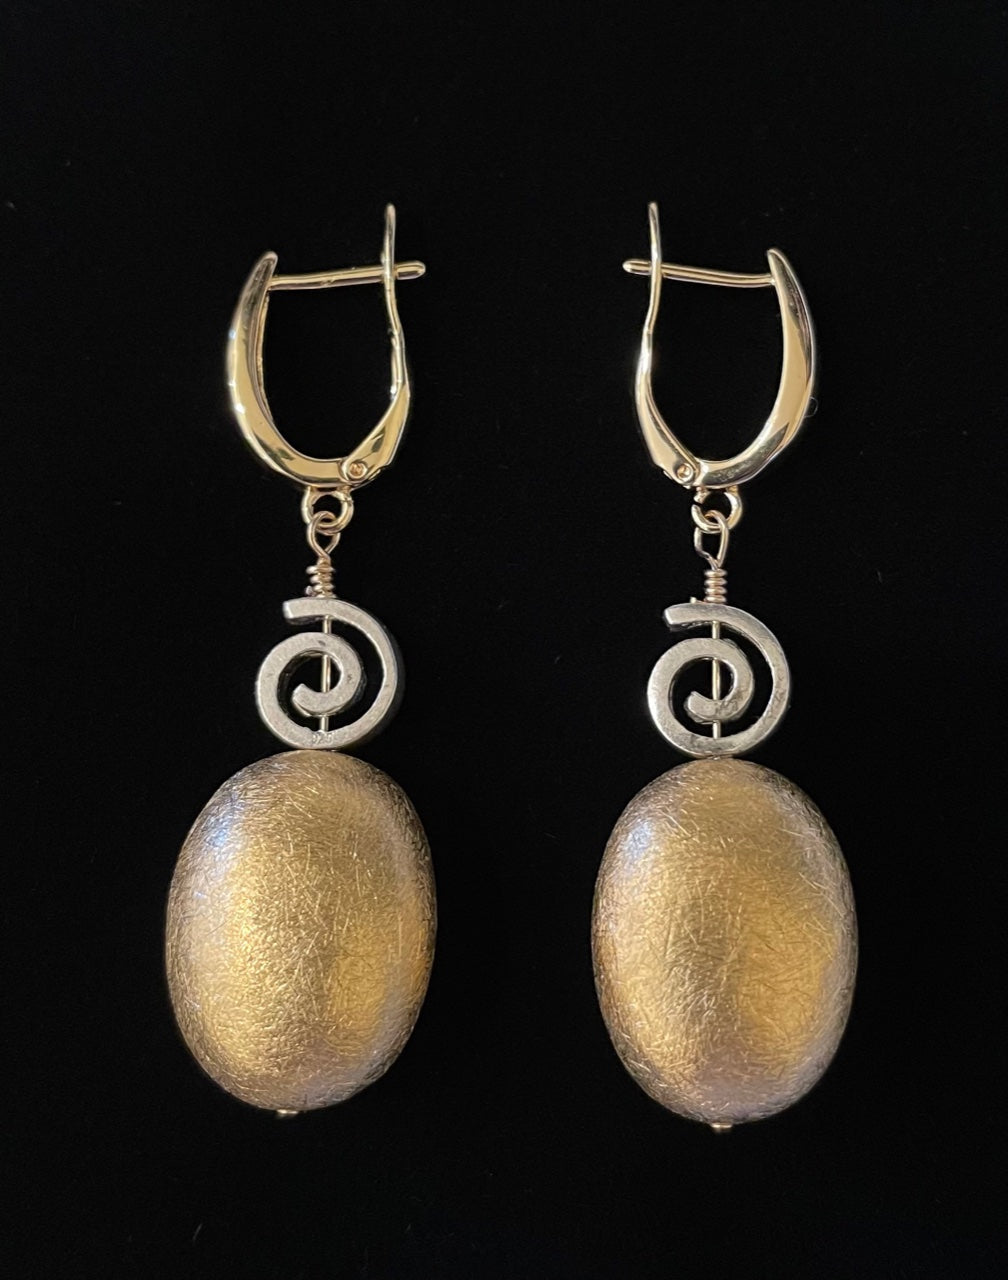 Earrings - Sterling silver and 14K gold filled hanging earrings